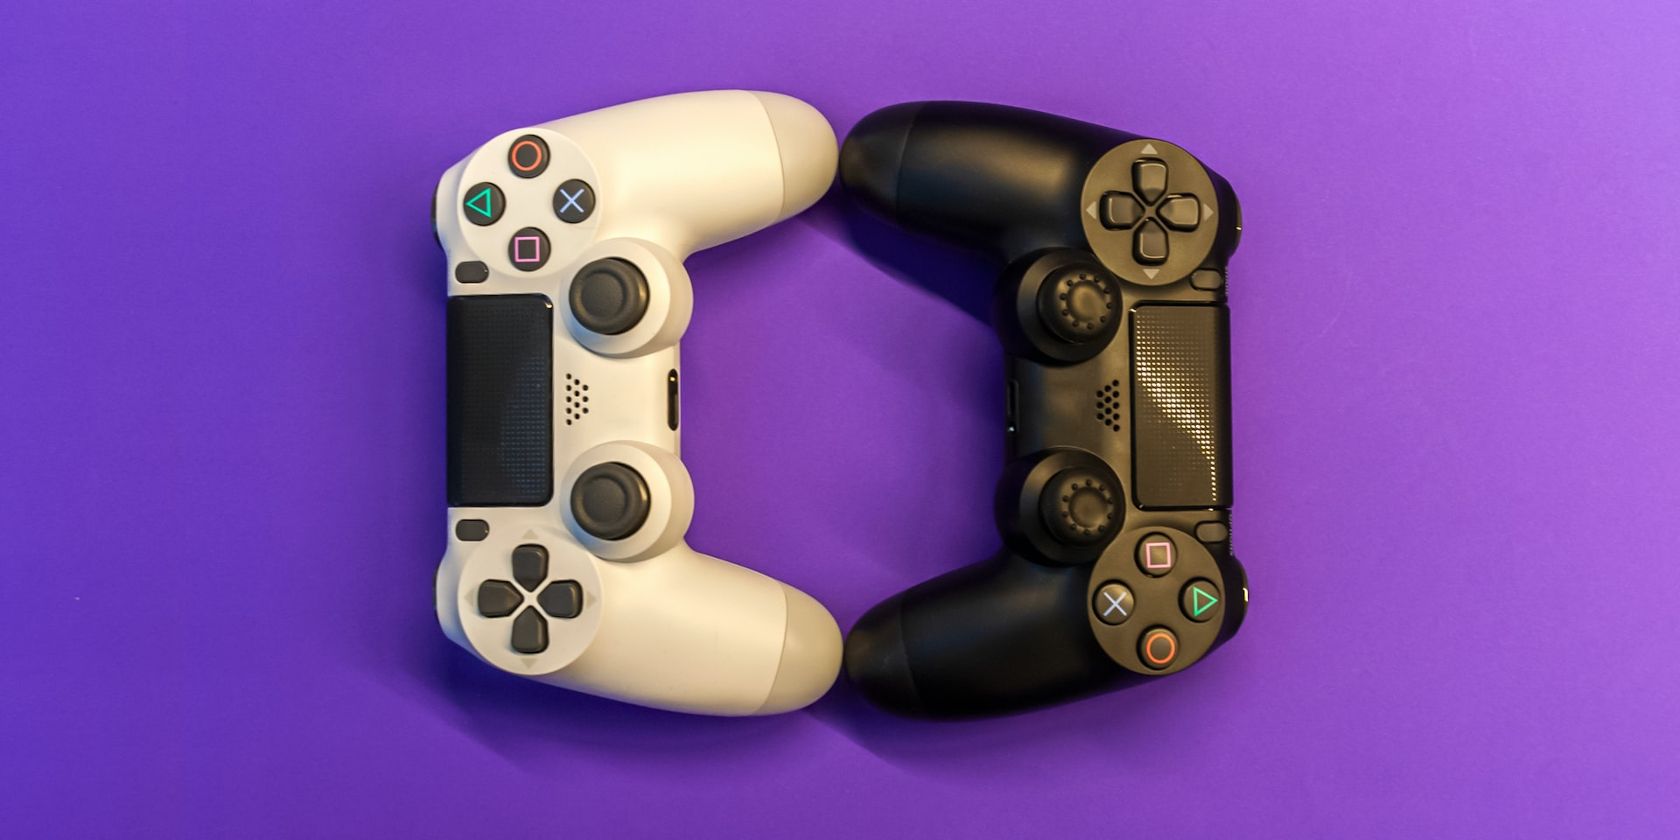 Two PlayStation Console Controllers